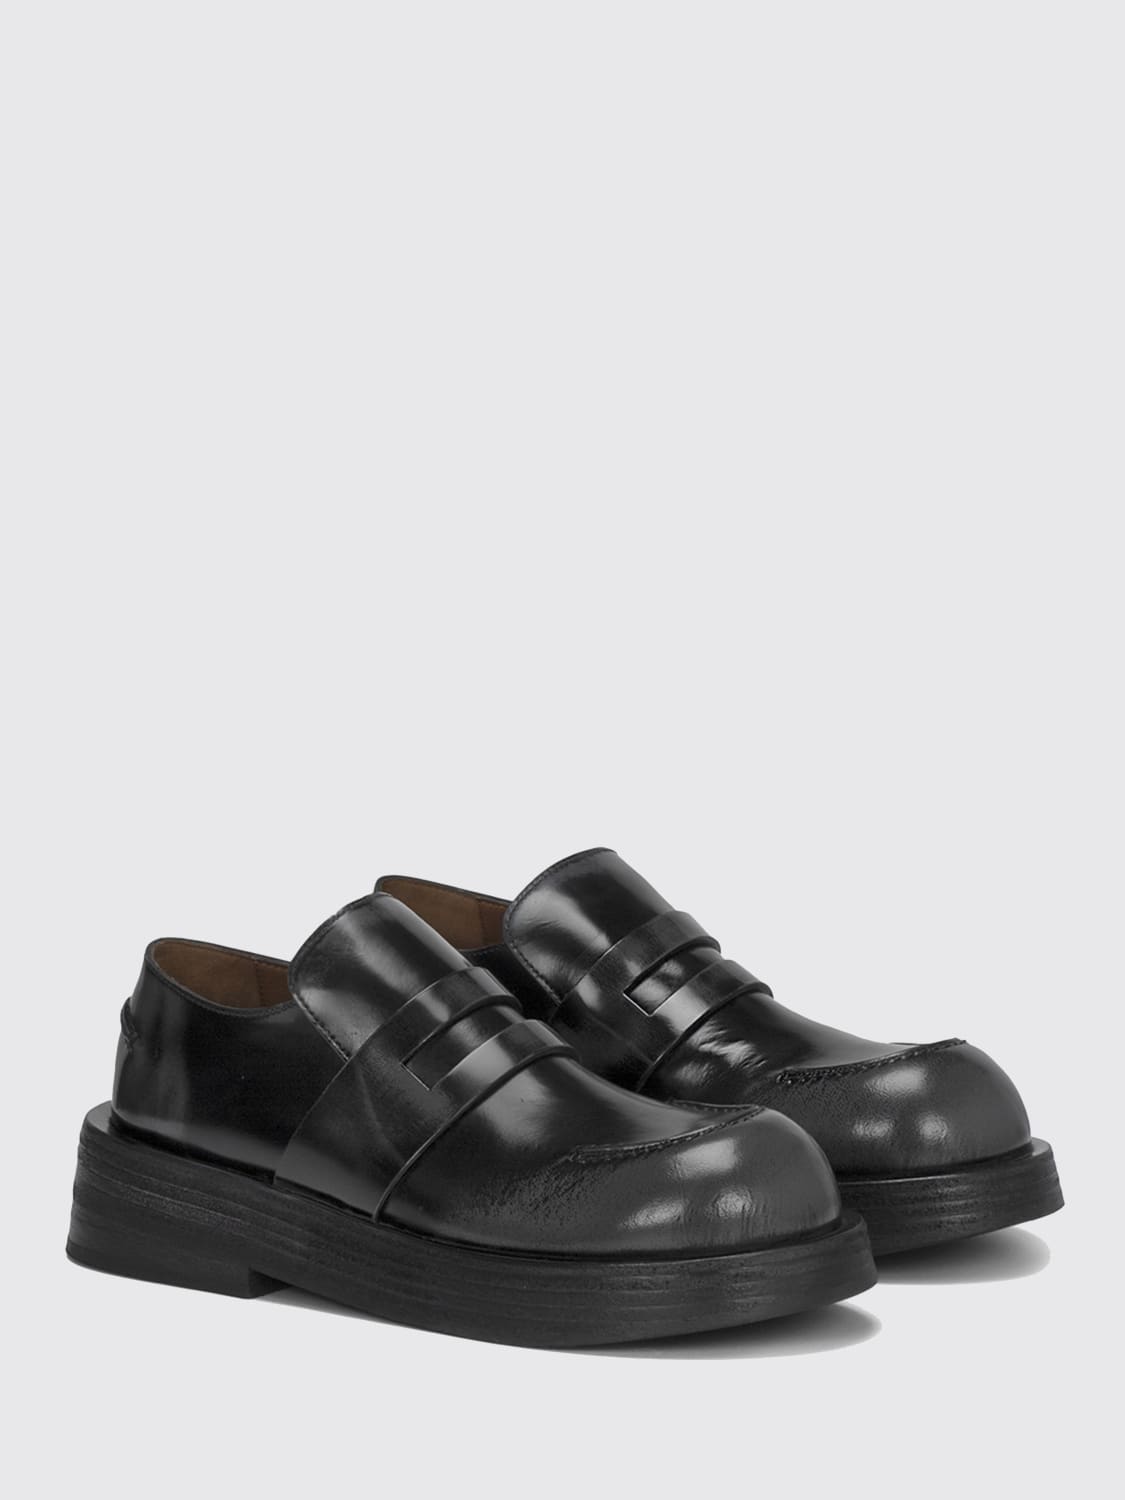 Marsèll Outlet: Musona moccasin in abrasive leather - Black | Marsèll ...